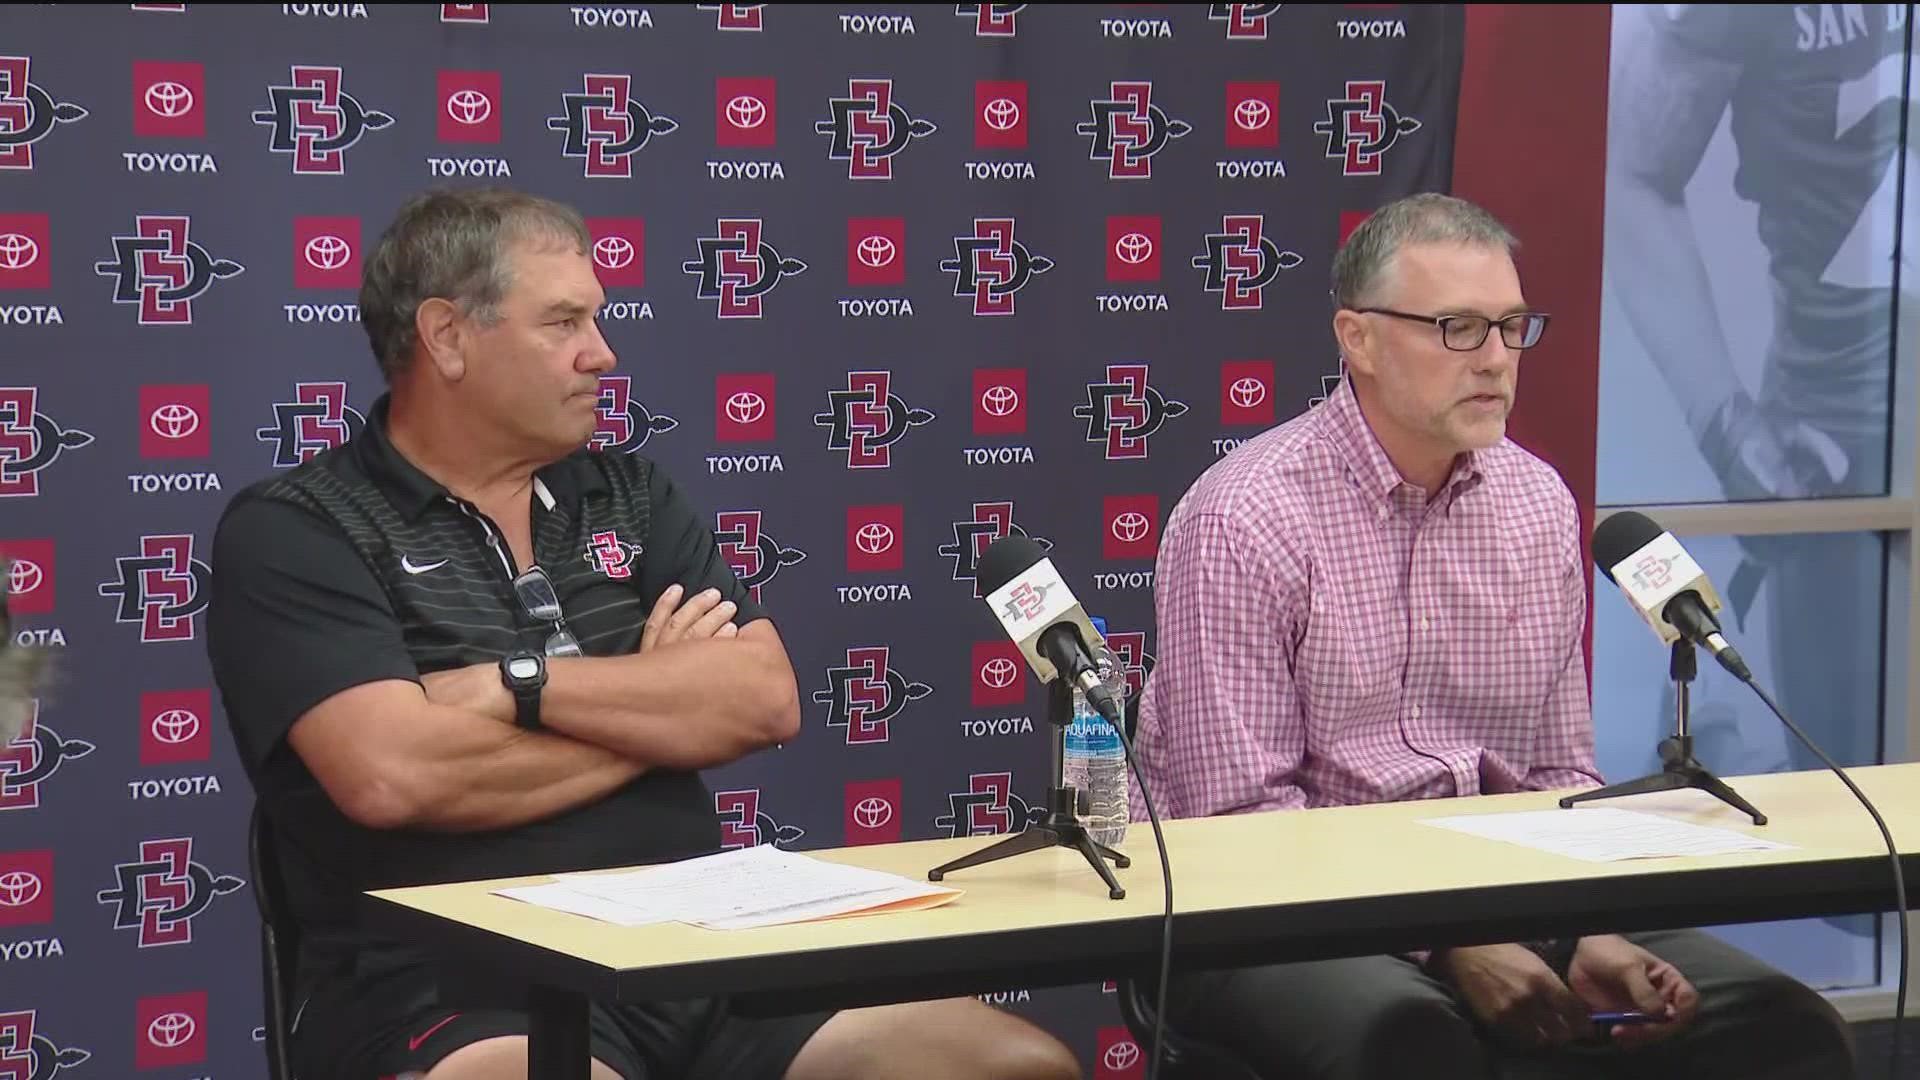 SDSU Director of Athletics J.D. Wicker responded to some but not all questions.